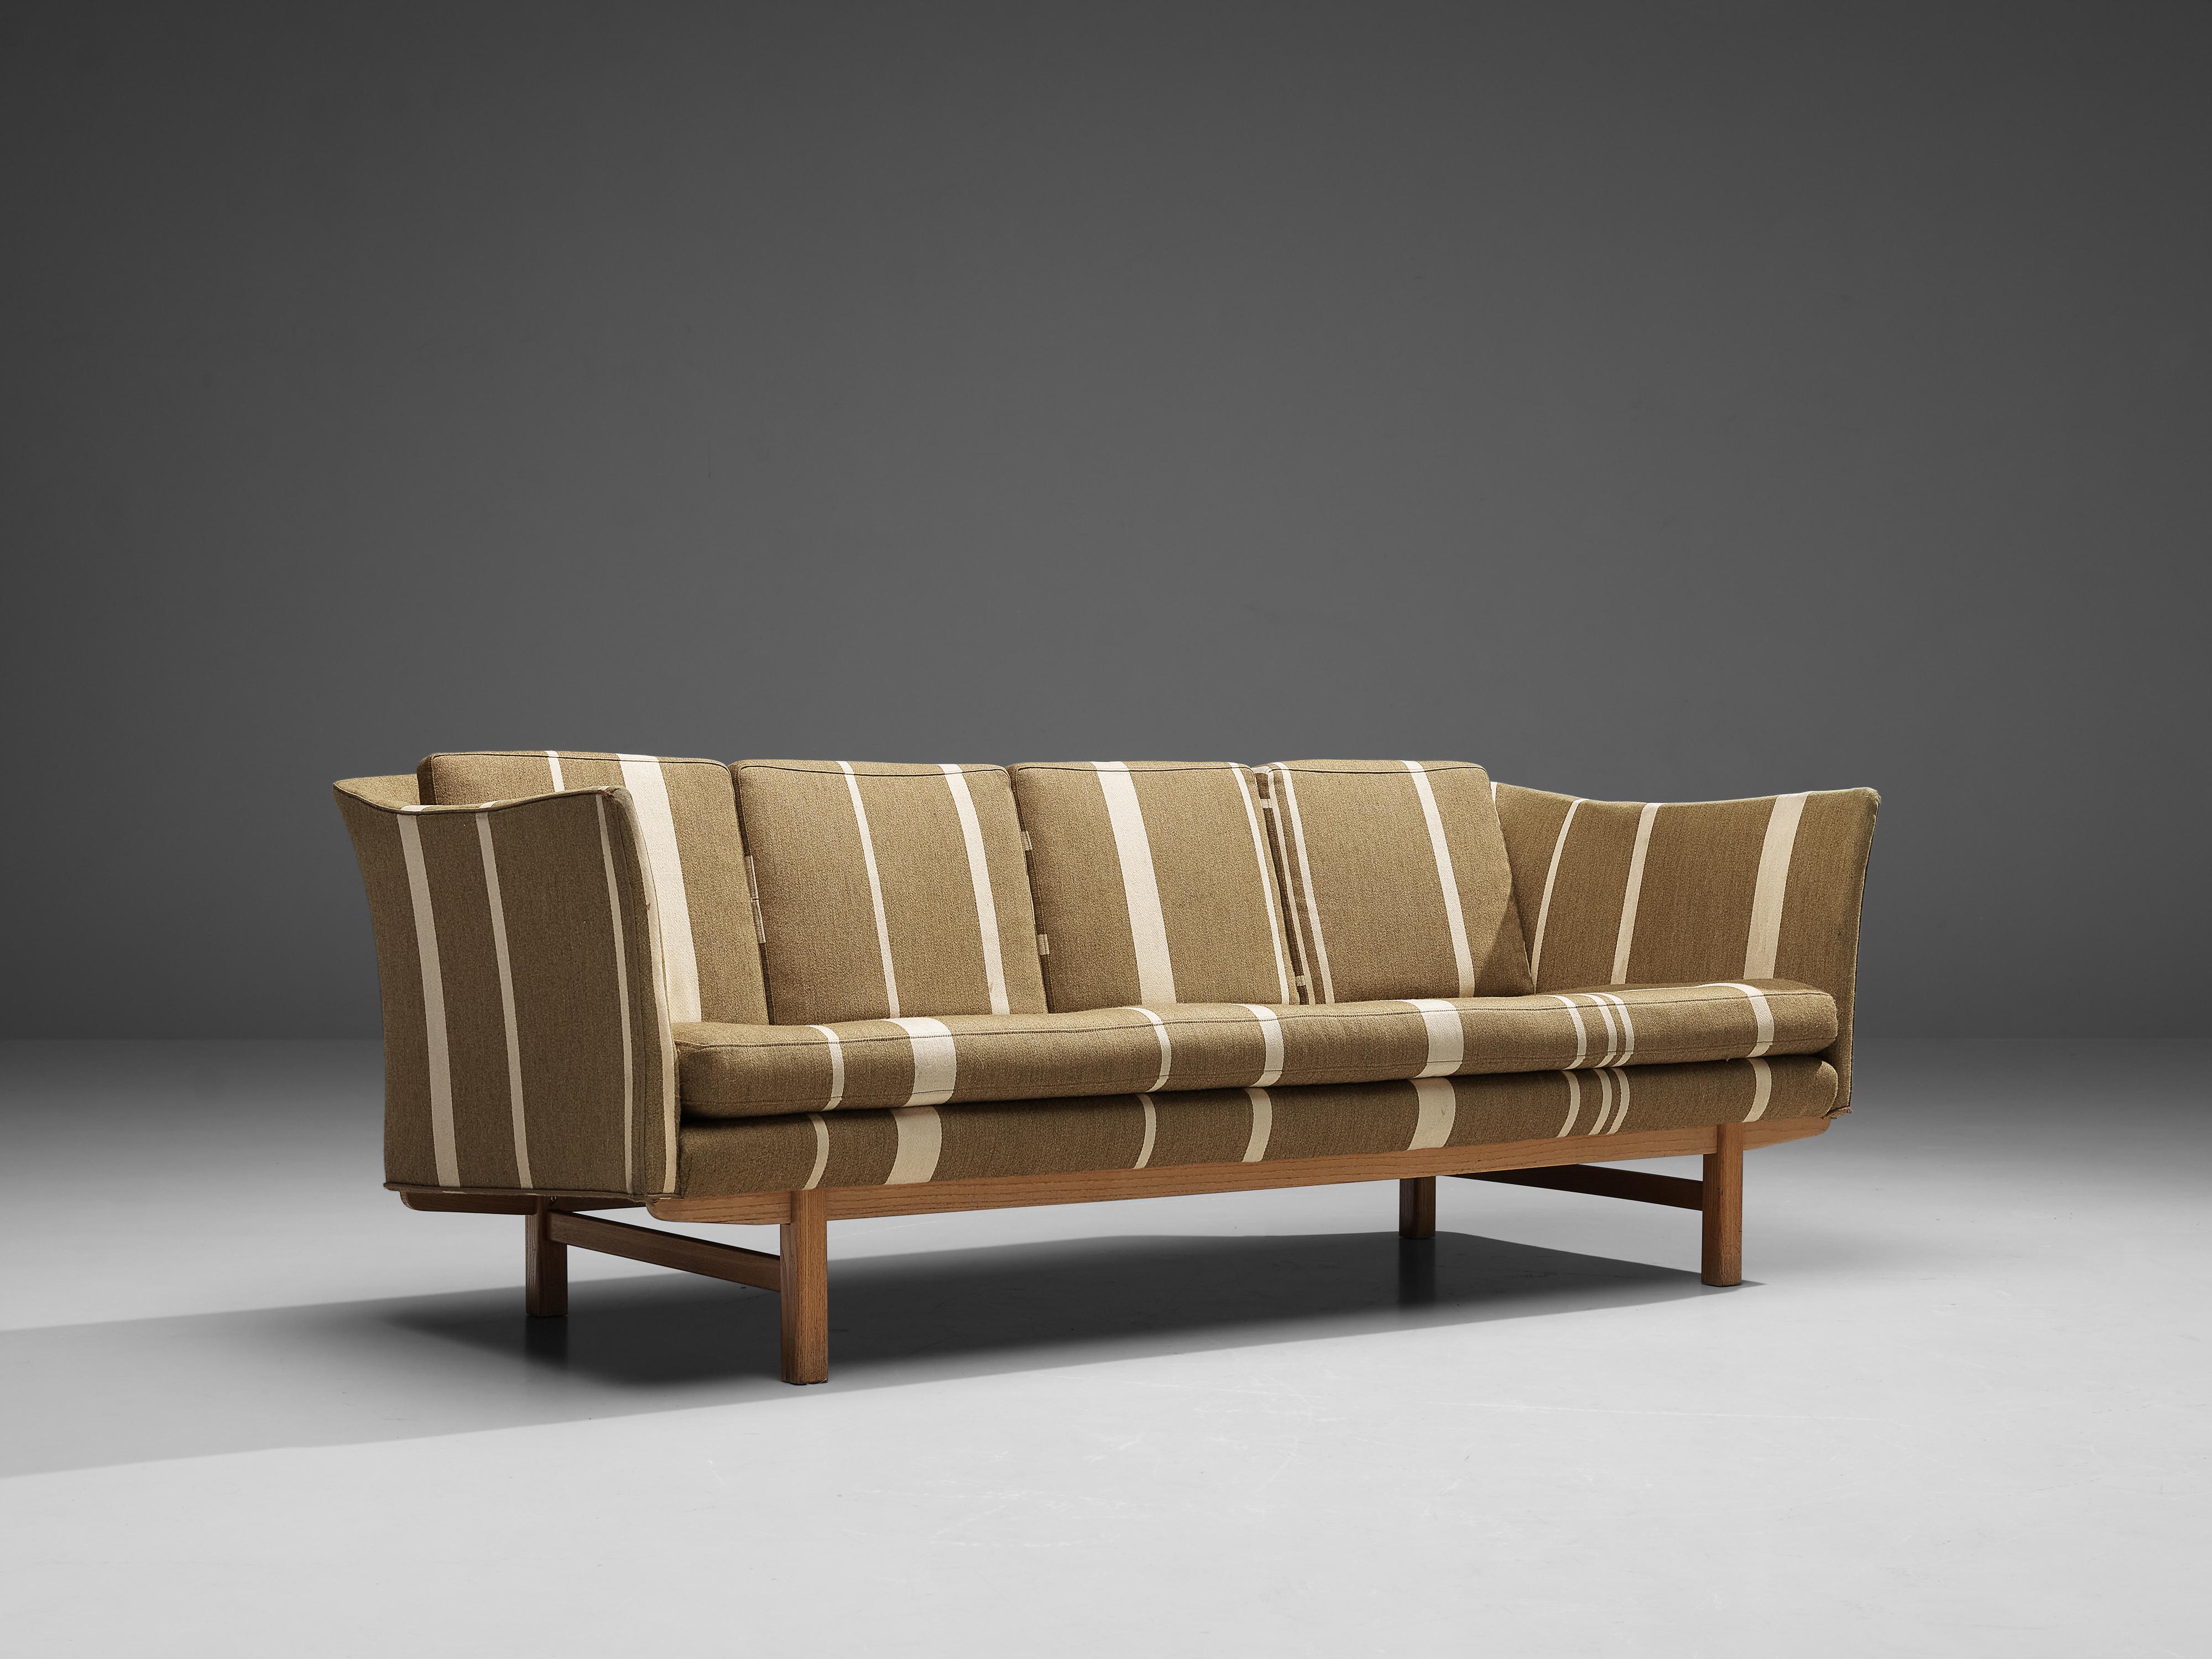 Sofa, fabric, wood, Denmark, 1950s

This sofa of Danish origin features modest and subtle lines and shapes that emphasize the clear construction of the design. The armrests are slightly positioned outwards, which contributes to the sofa's open